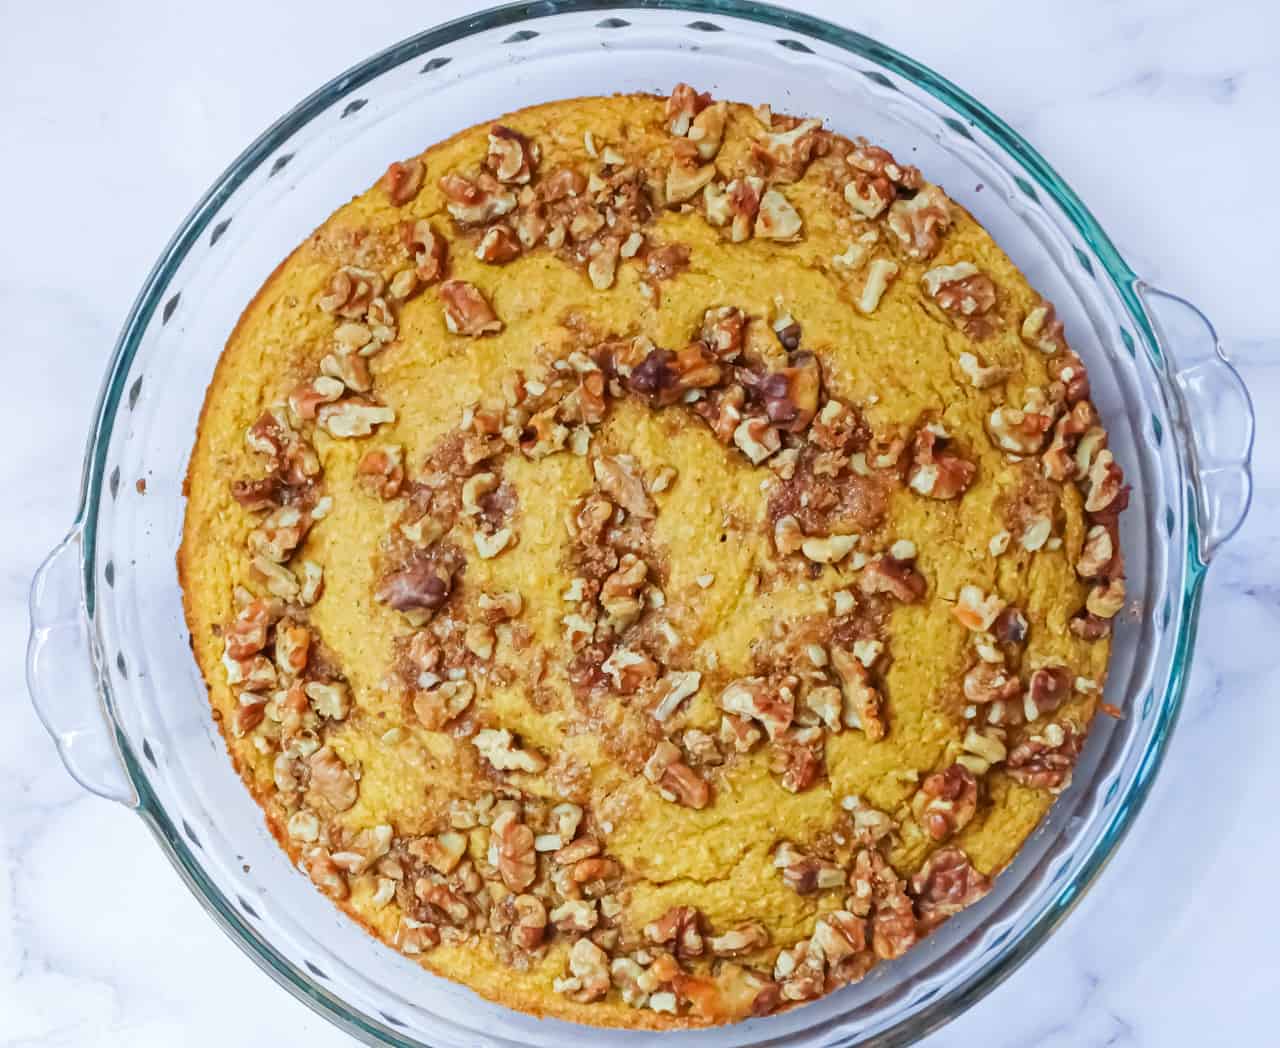 cooked pumpkin cornbread with walnut topping in a pie plate on a white background